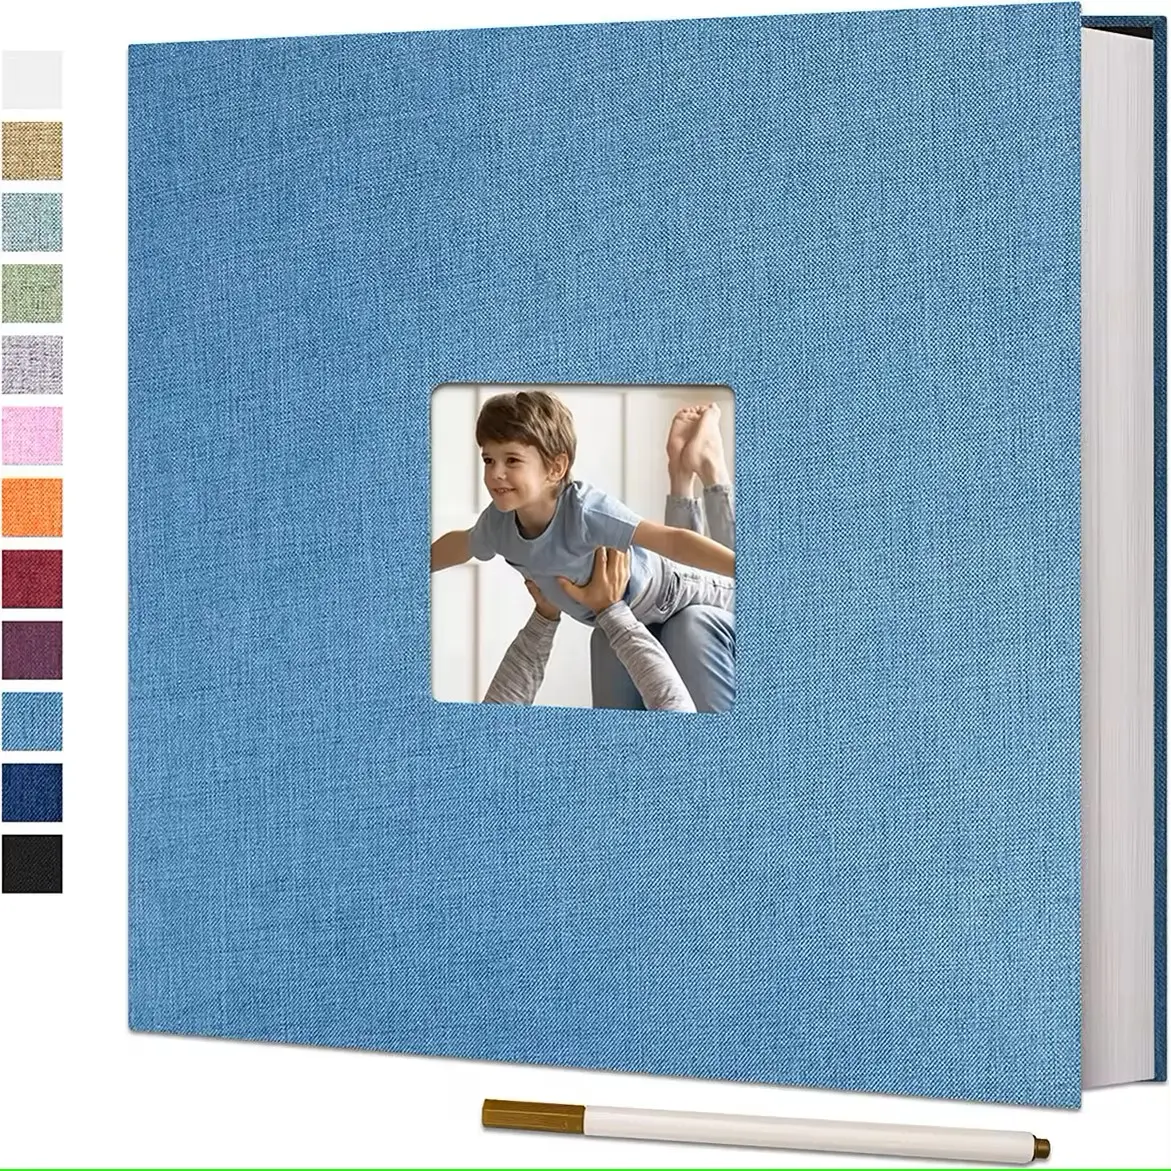 Customized Linen Bound Photo Album 4x6 Wedding DIY Travel Collection Memory Journal Picture Album And Pen Gift Box